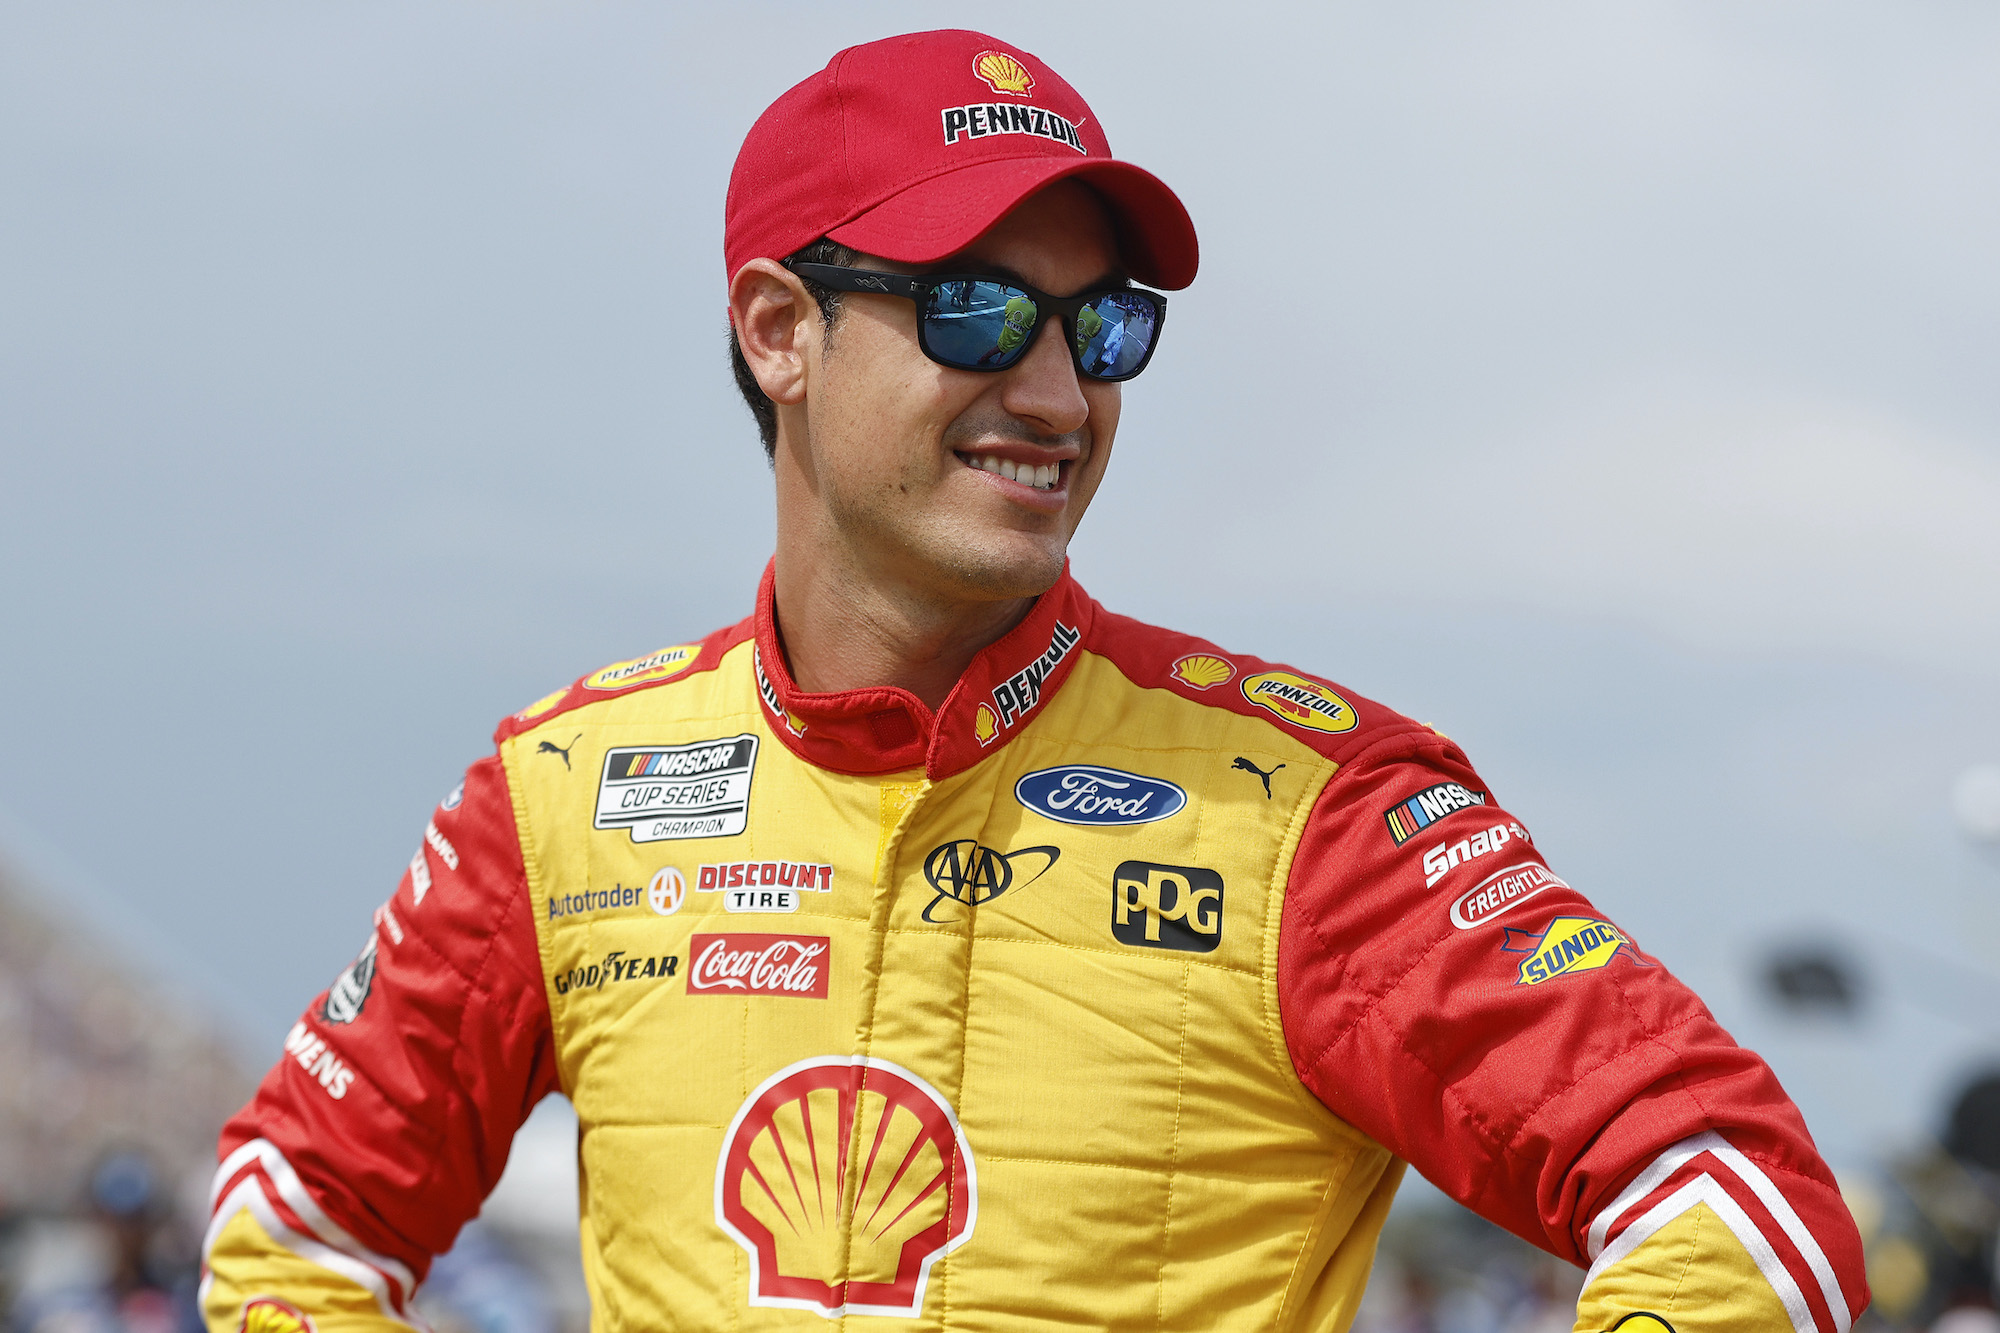 Joey Logano Reveals He Had Conversation With Bubba Wallace After Michigan, and 23XI Racing Driver Didn’t Have Most Flattering Words to Say About Him